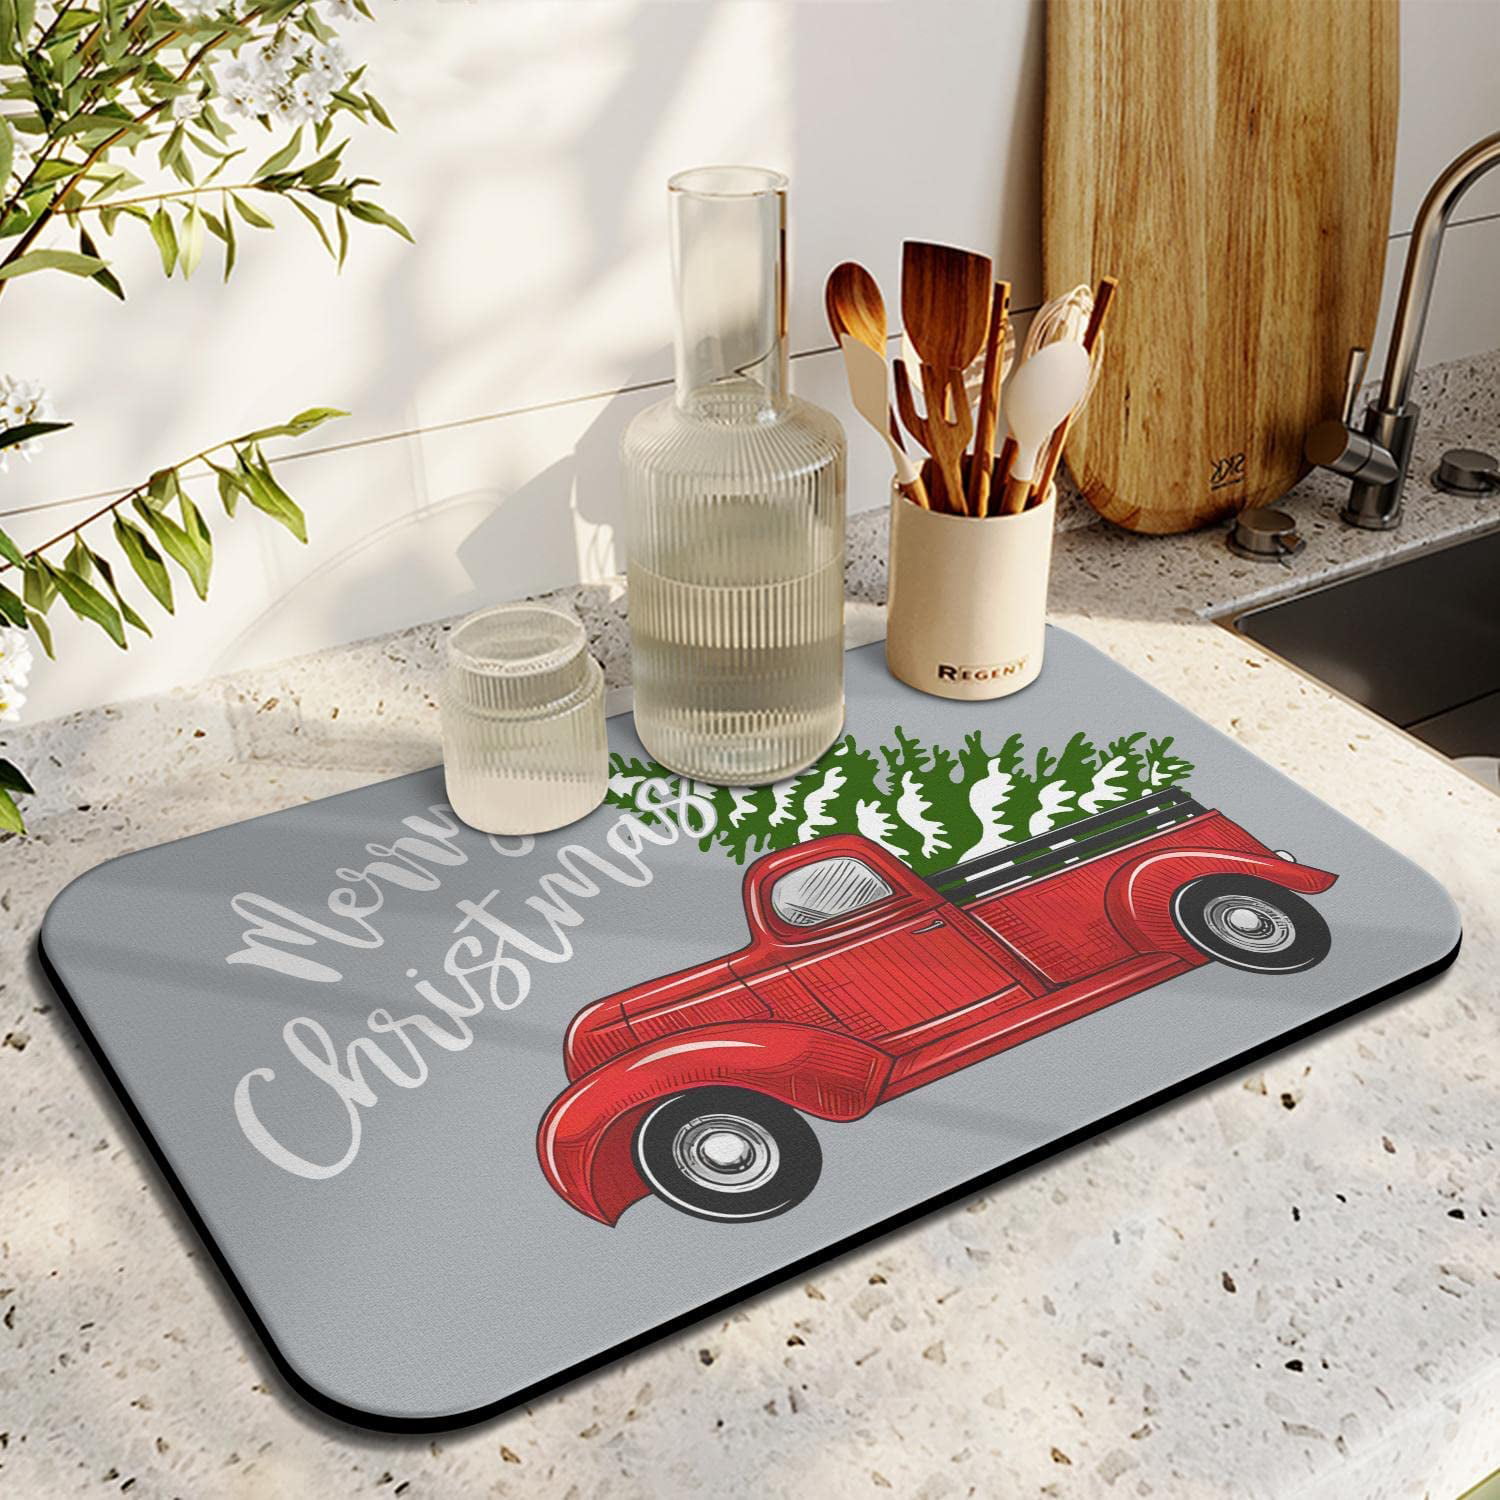  Christmas Dish Drying Mat for Kitchen Counter Gnome Xmas Tree  Ball Drying Pad Absorbent Drying Mats for Countertops Sinks Draining Racks  Pine Needles Snowaflake Snow Red Xmas Decor 16x18 Inch: Home